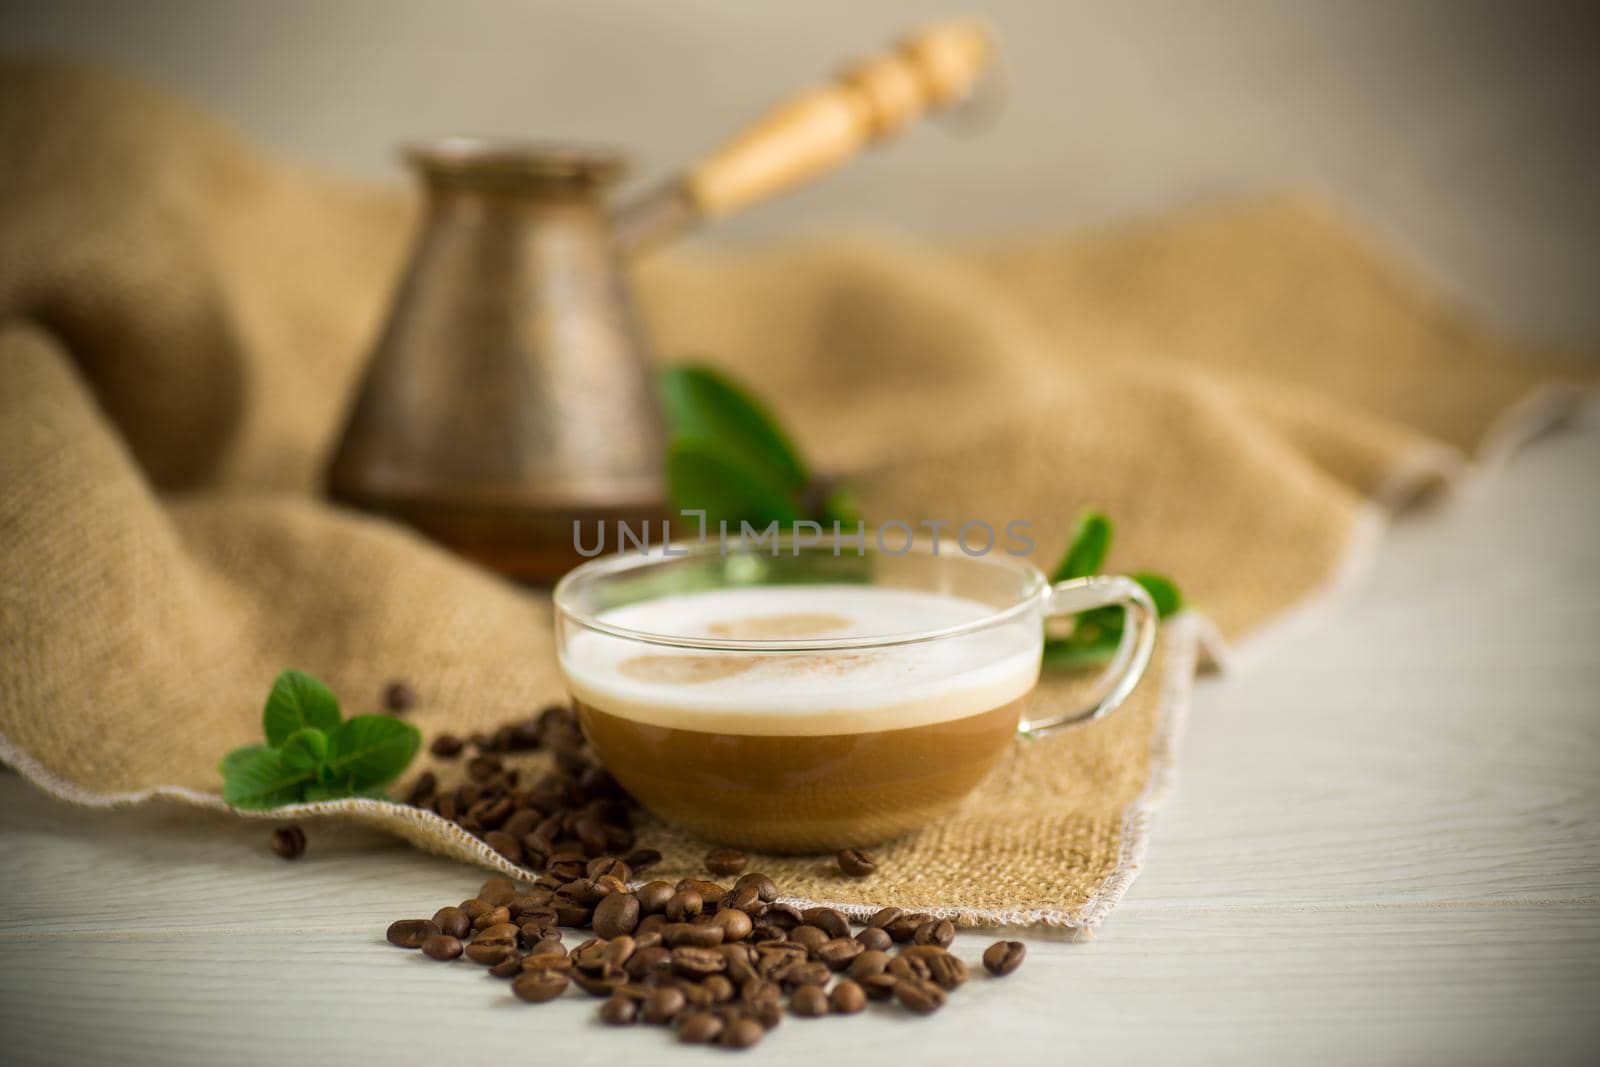 Cup of coffee latte with heart shape and coffee beans on old wooden background